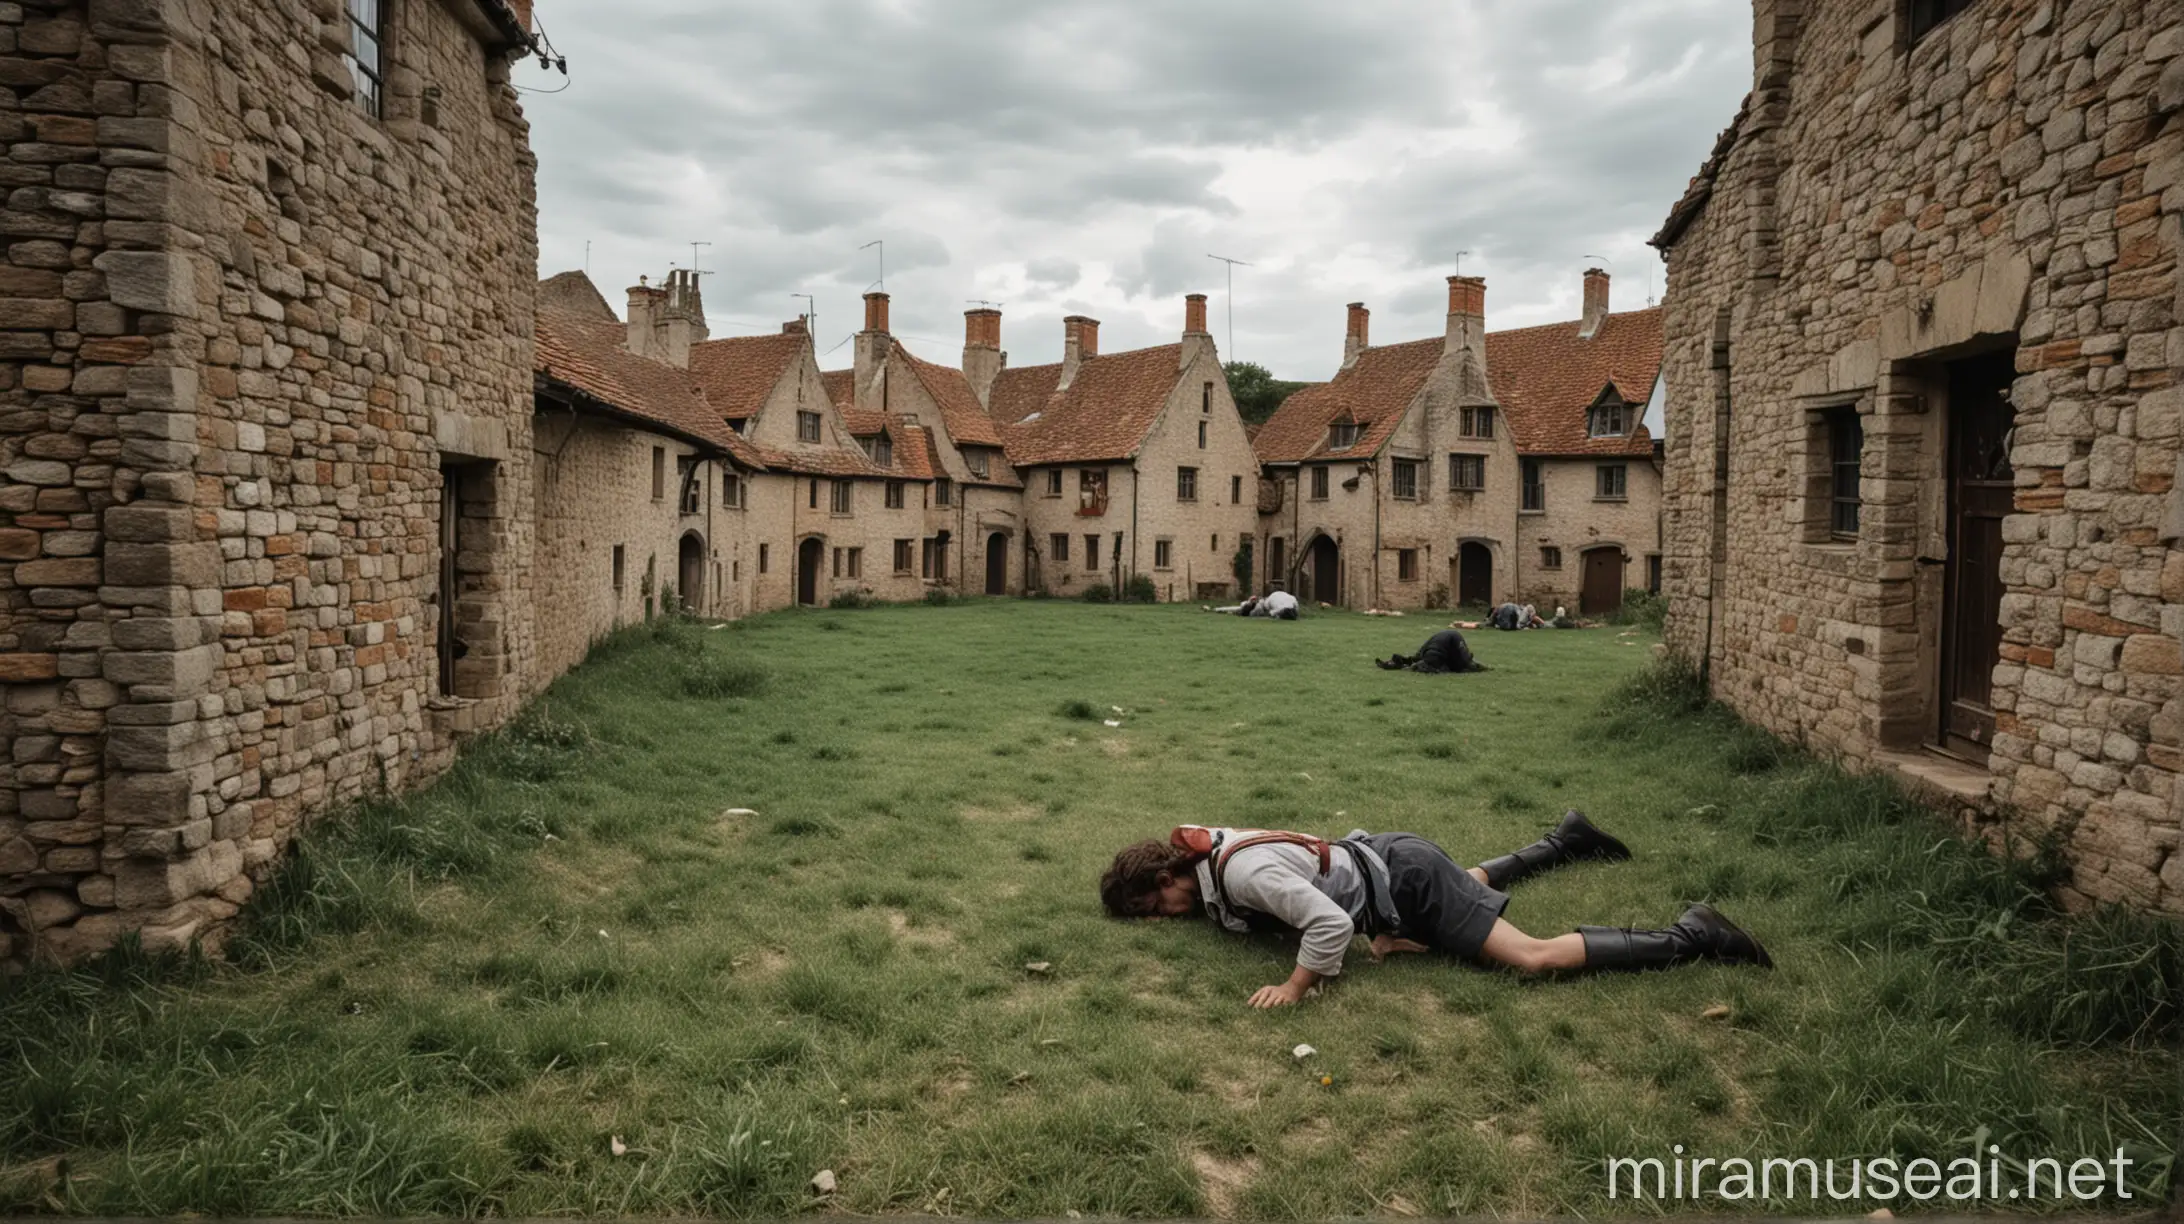 I collapsed on my knees in defeat in the middle of a field surrounded by medieval houses